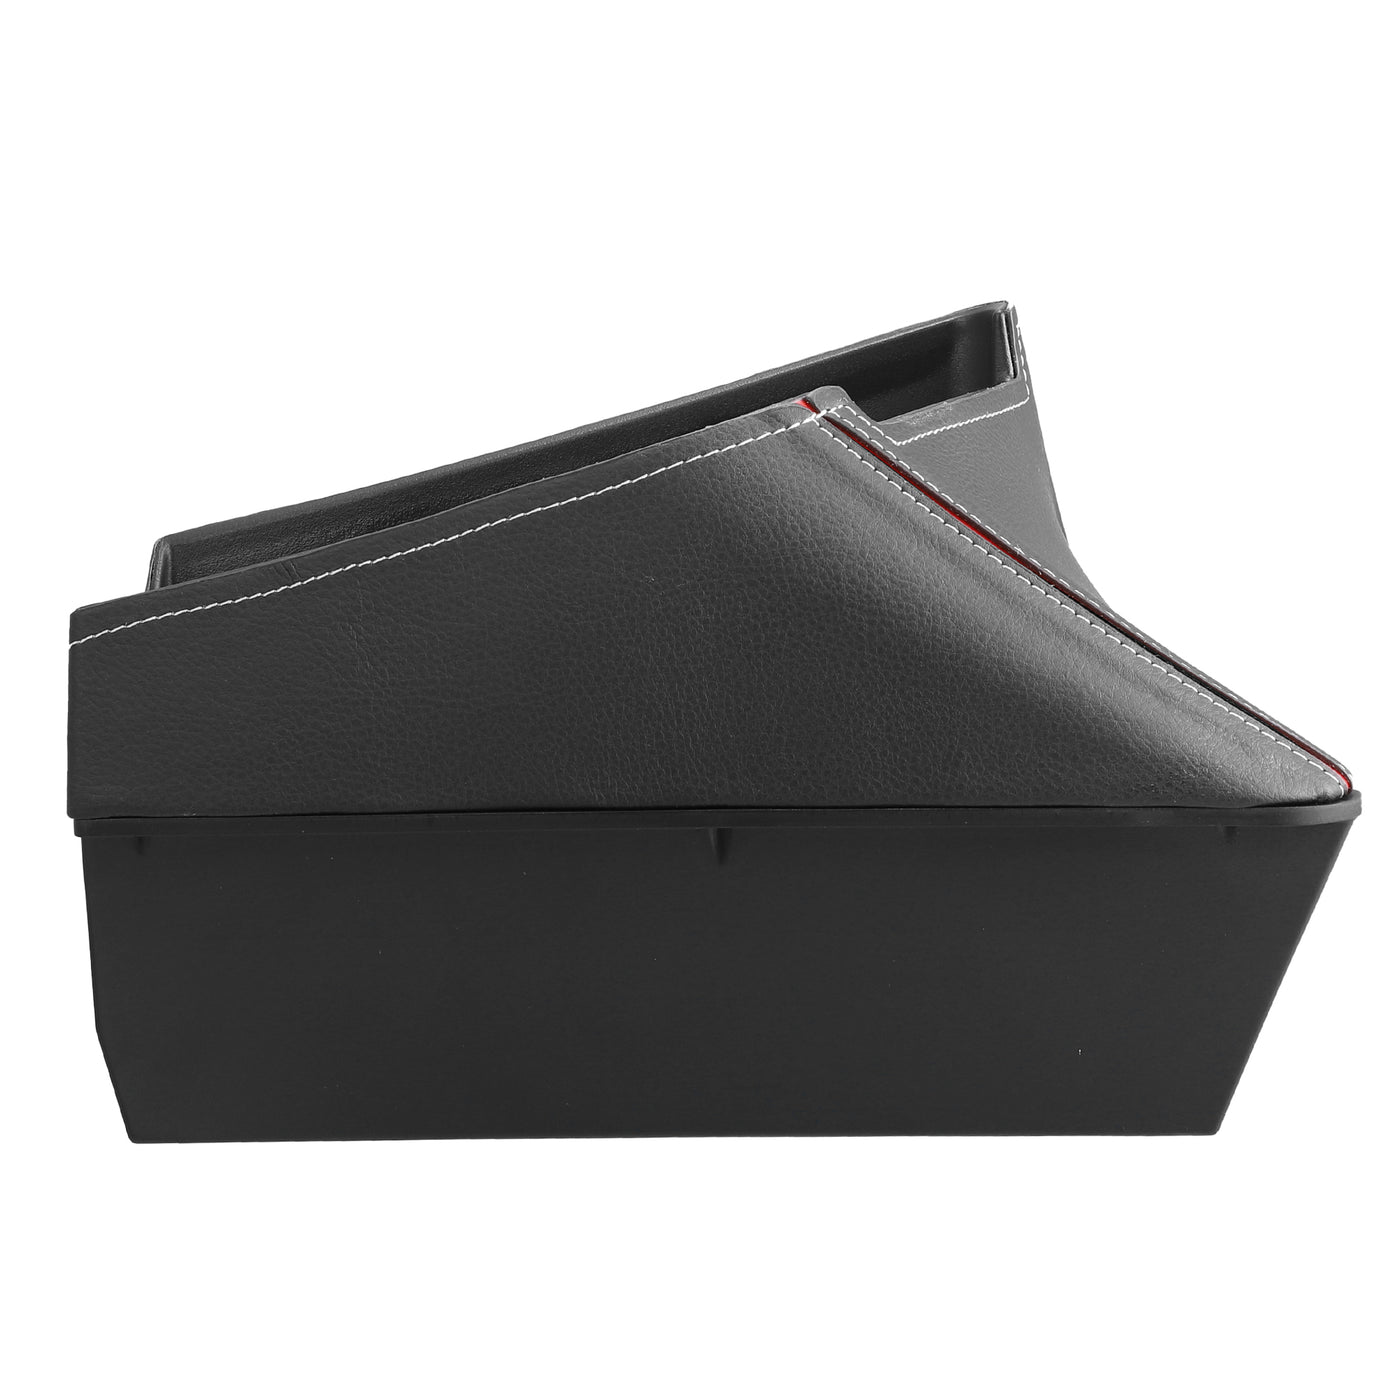 X AUTOHAUX Car Center Armrest ABS Storage Box Organizer Container Tray for BMW X1 F48 2016-2021 for BMW X2 F47 2018-2021 Red Side Black